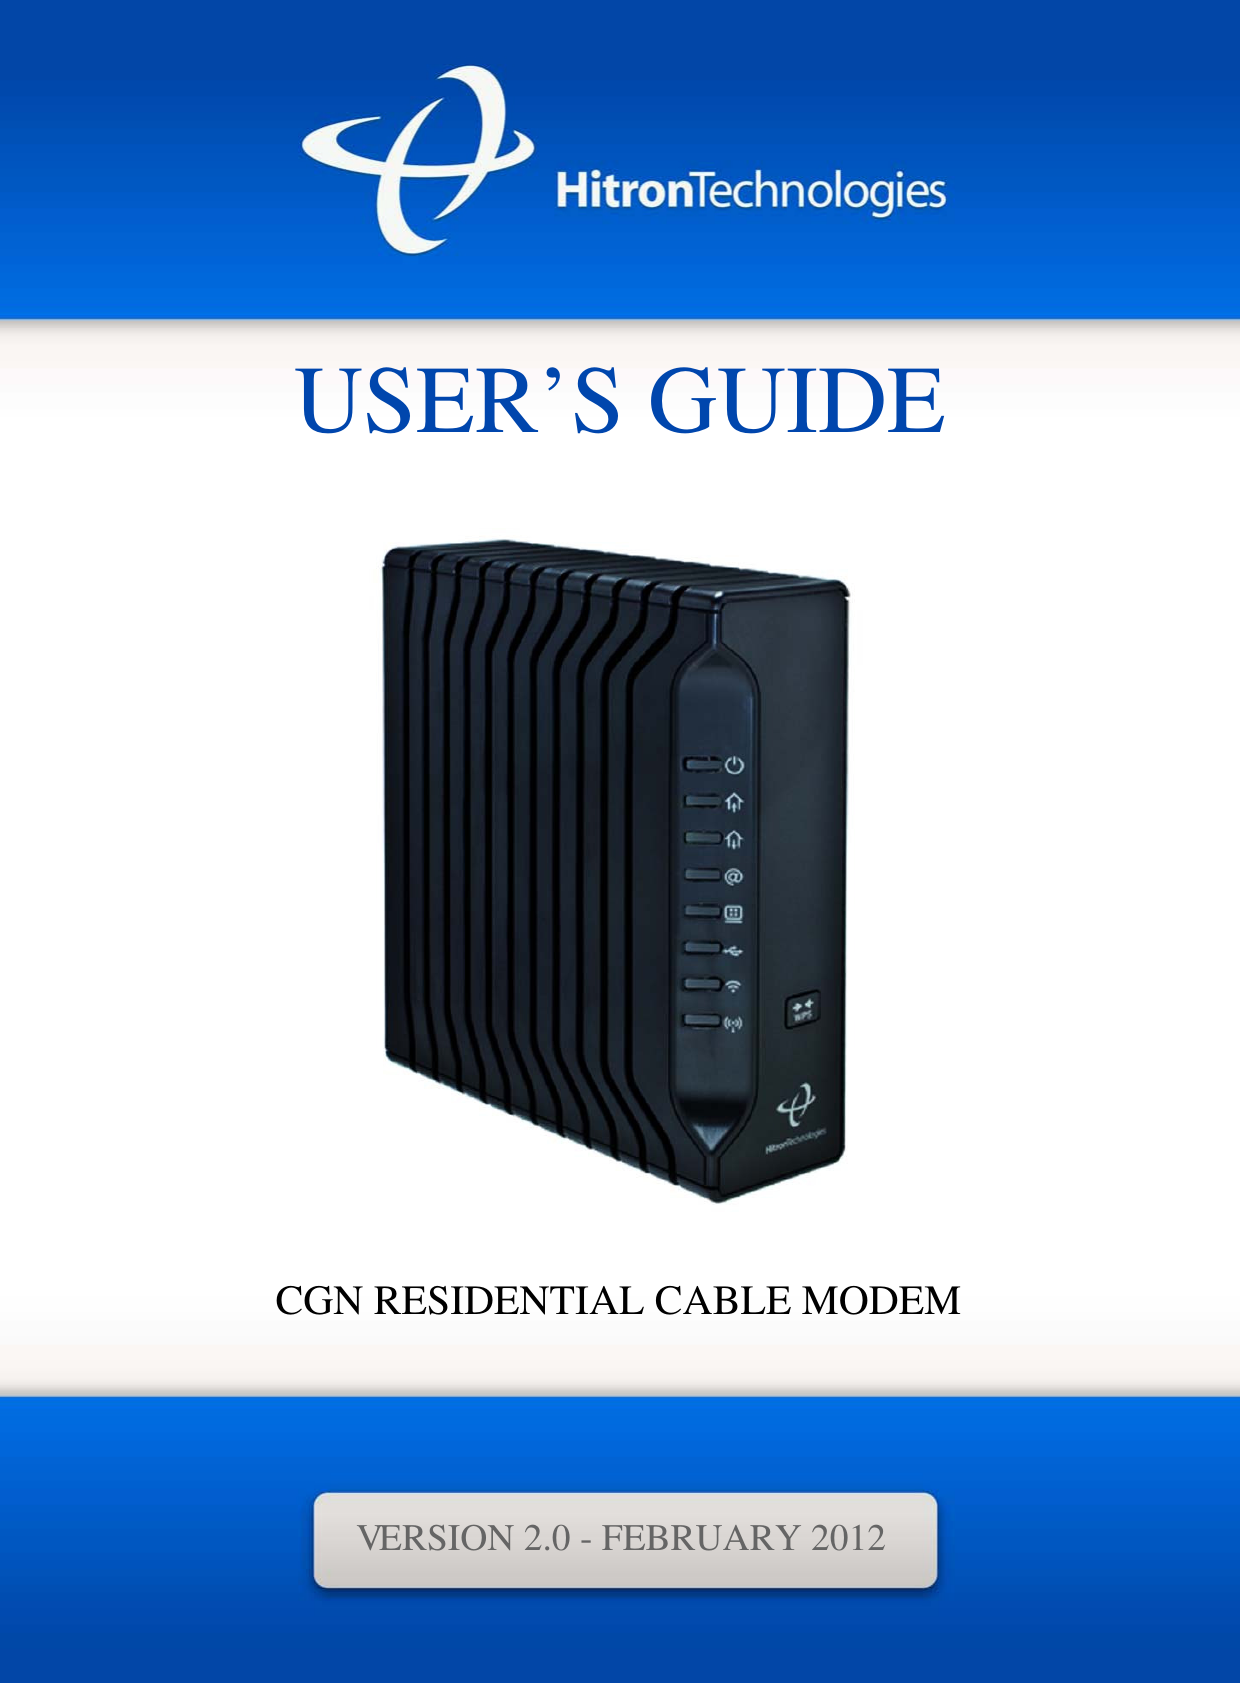 USER’S GUIDECGN RESIDENTIAL CABLE MODEMVERSION 2.0 - FEBRUARY 2012